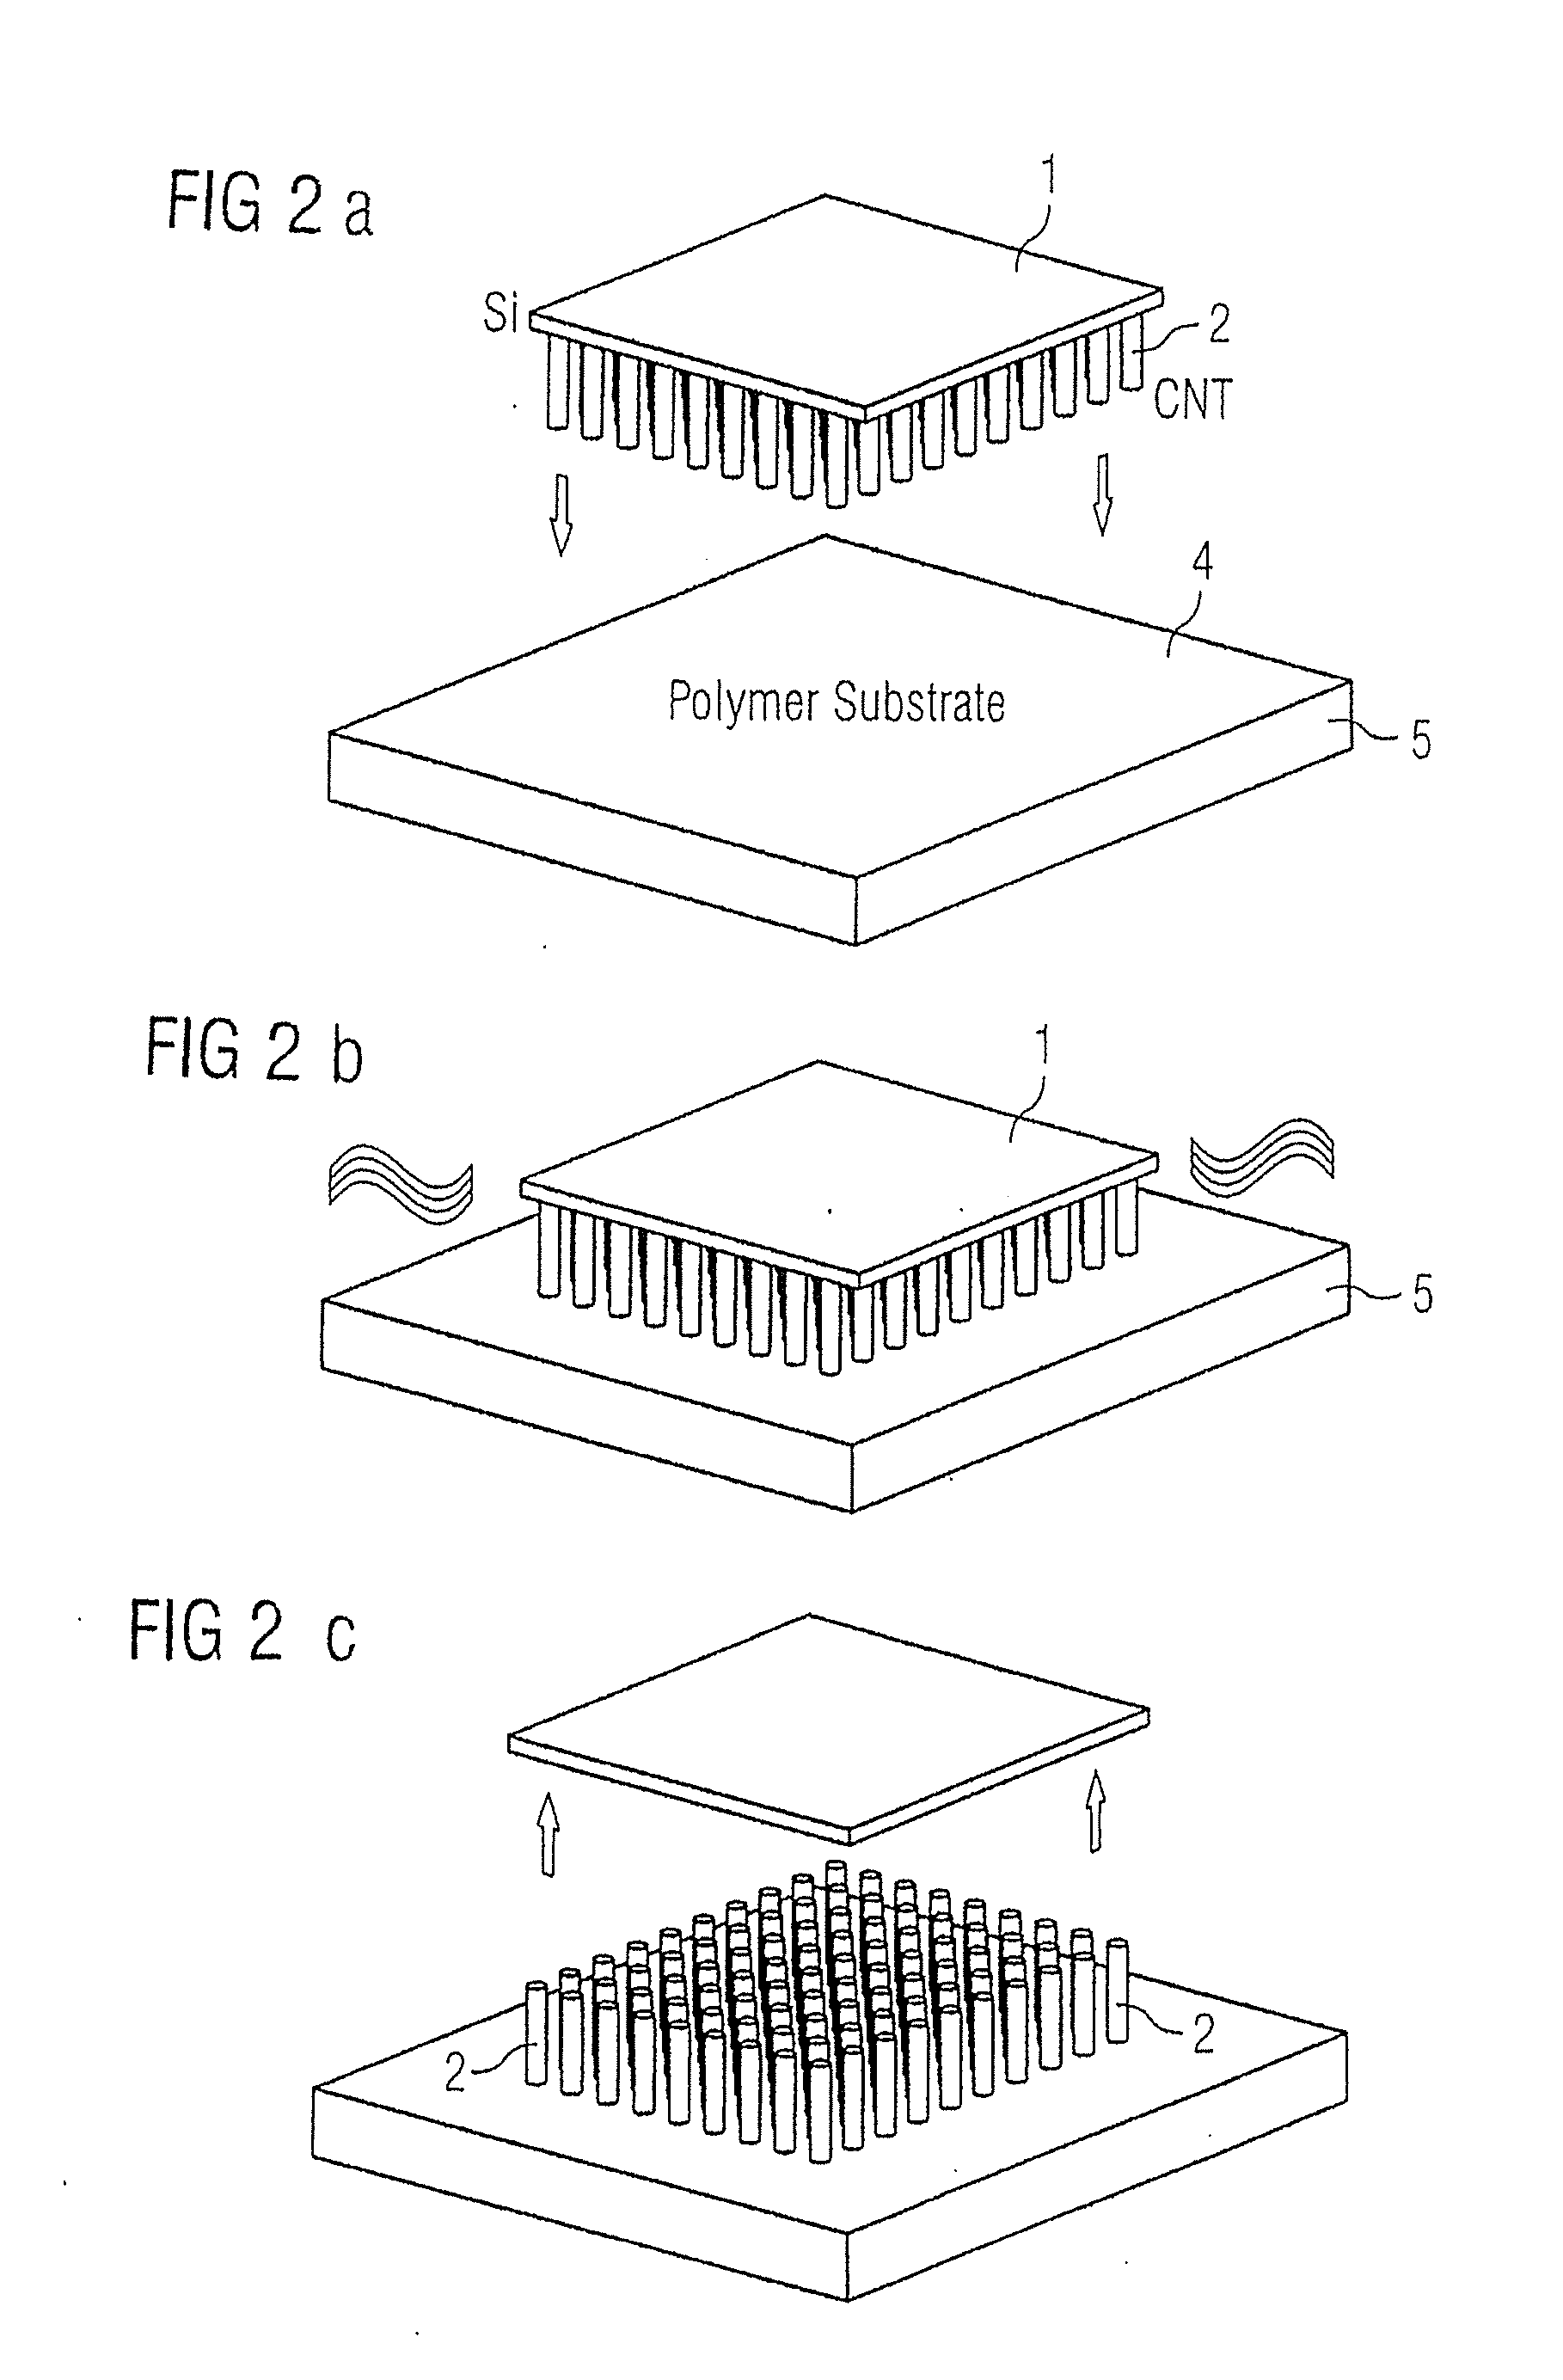 Substrate with carbon nanotubes, and method to transfer carbon nanotubes